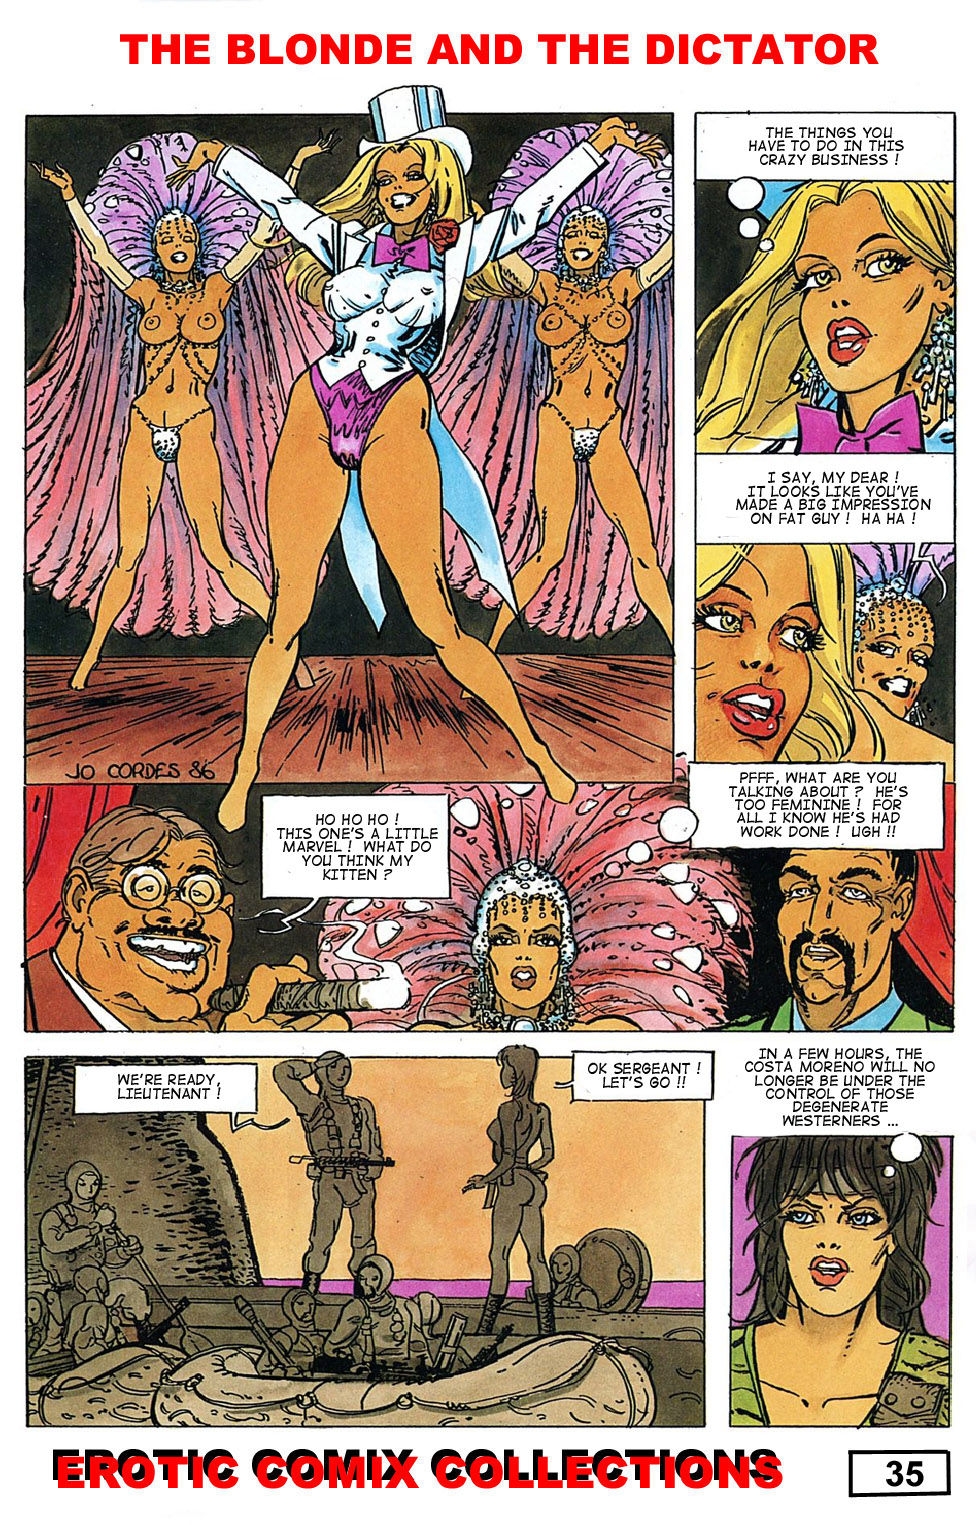 CHARLIE LOGAN #2 - THE BLONDE AND THE DICTATOR - A MALINVAUD TRANSLATION 36